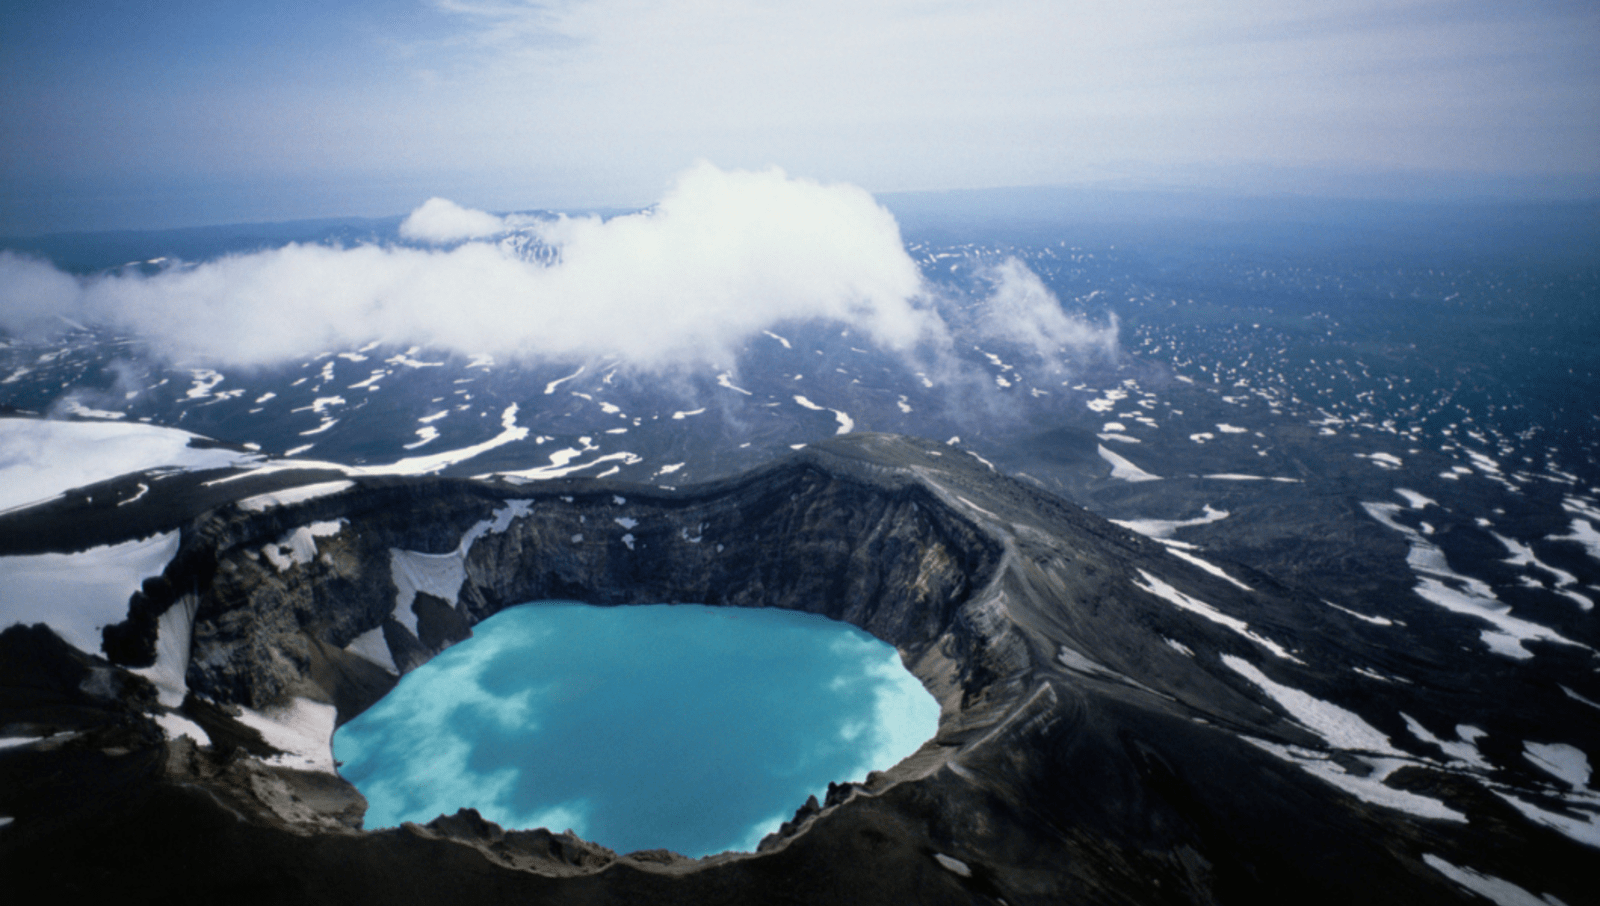 large crater in volcano filled with bright blue water